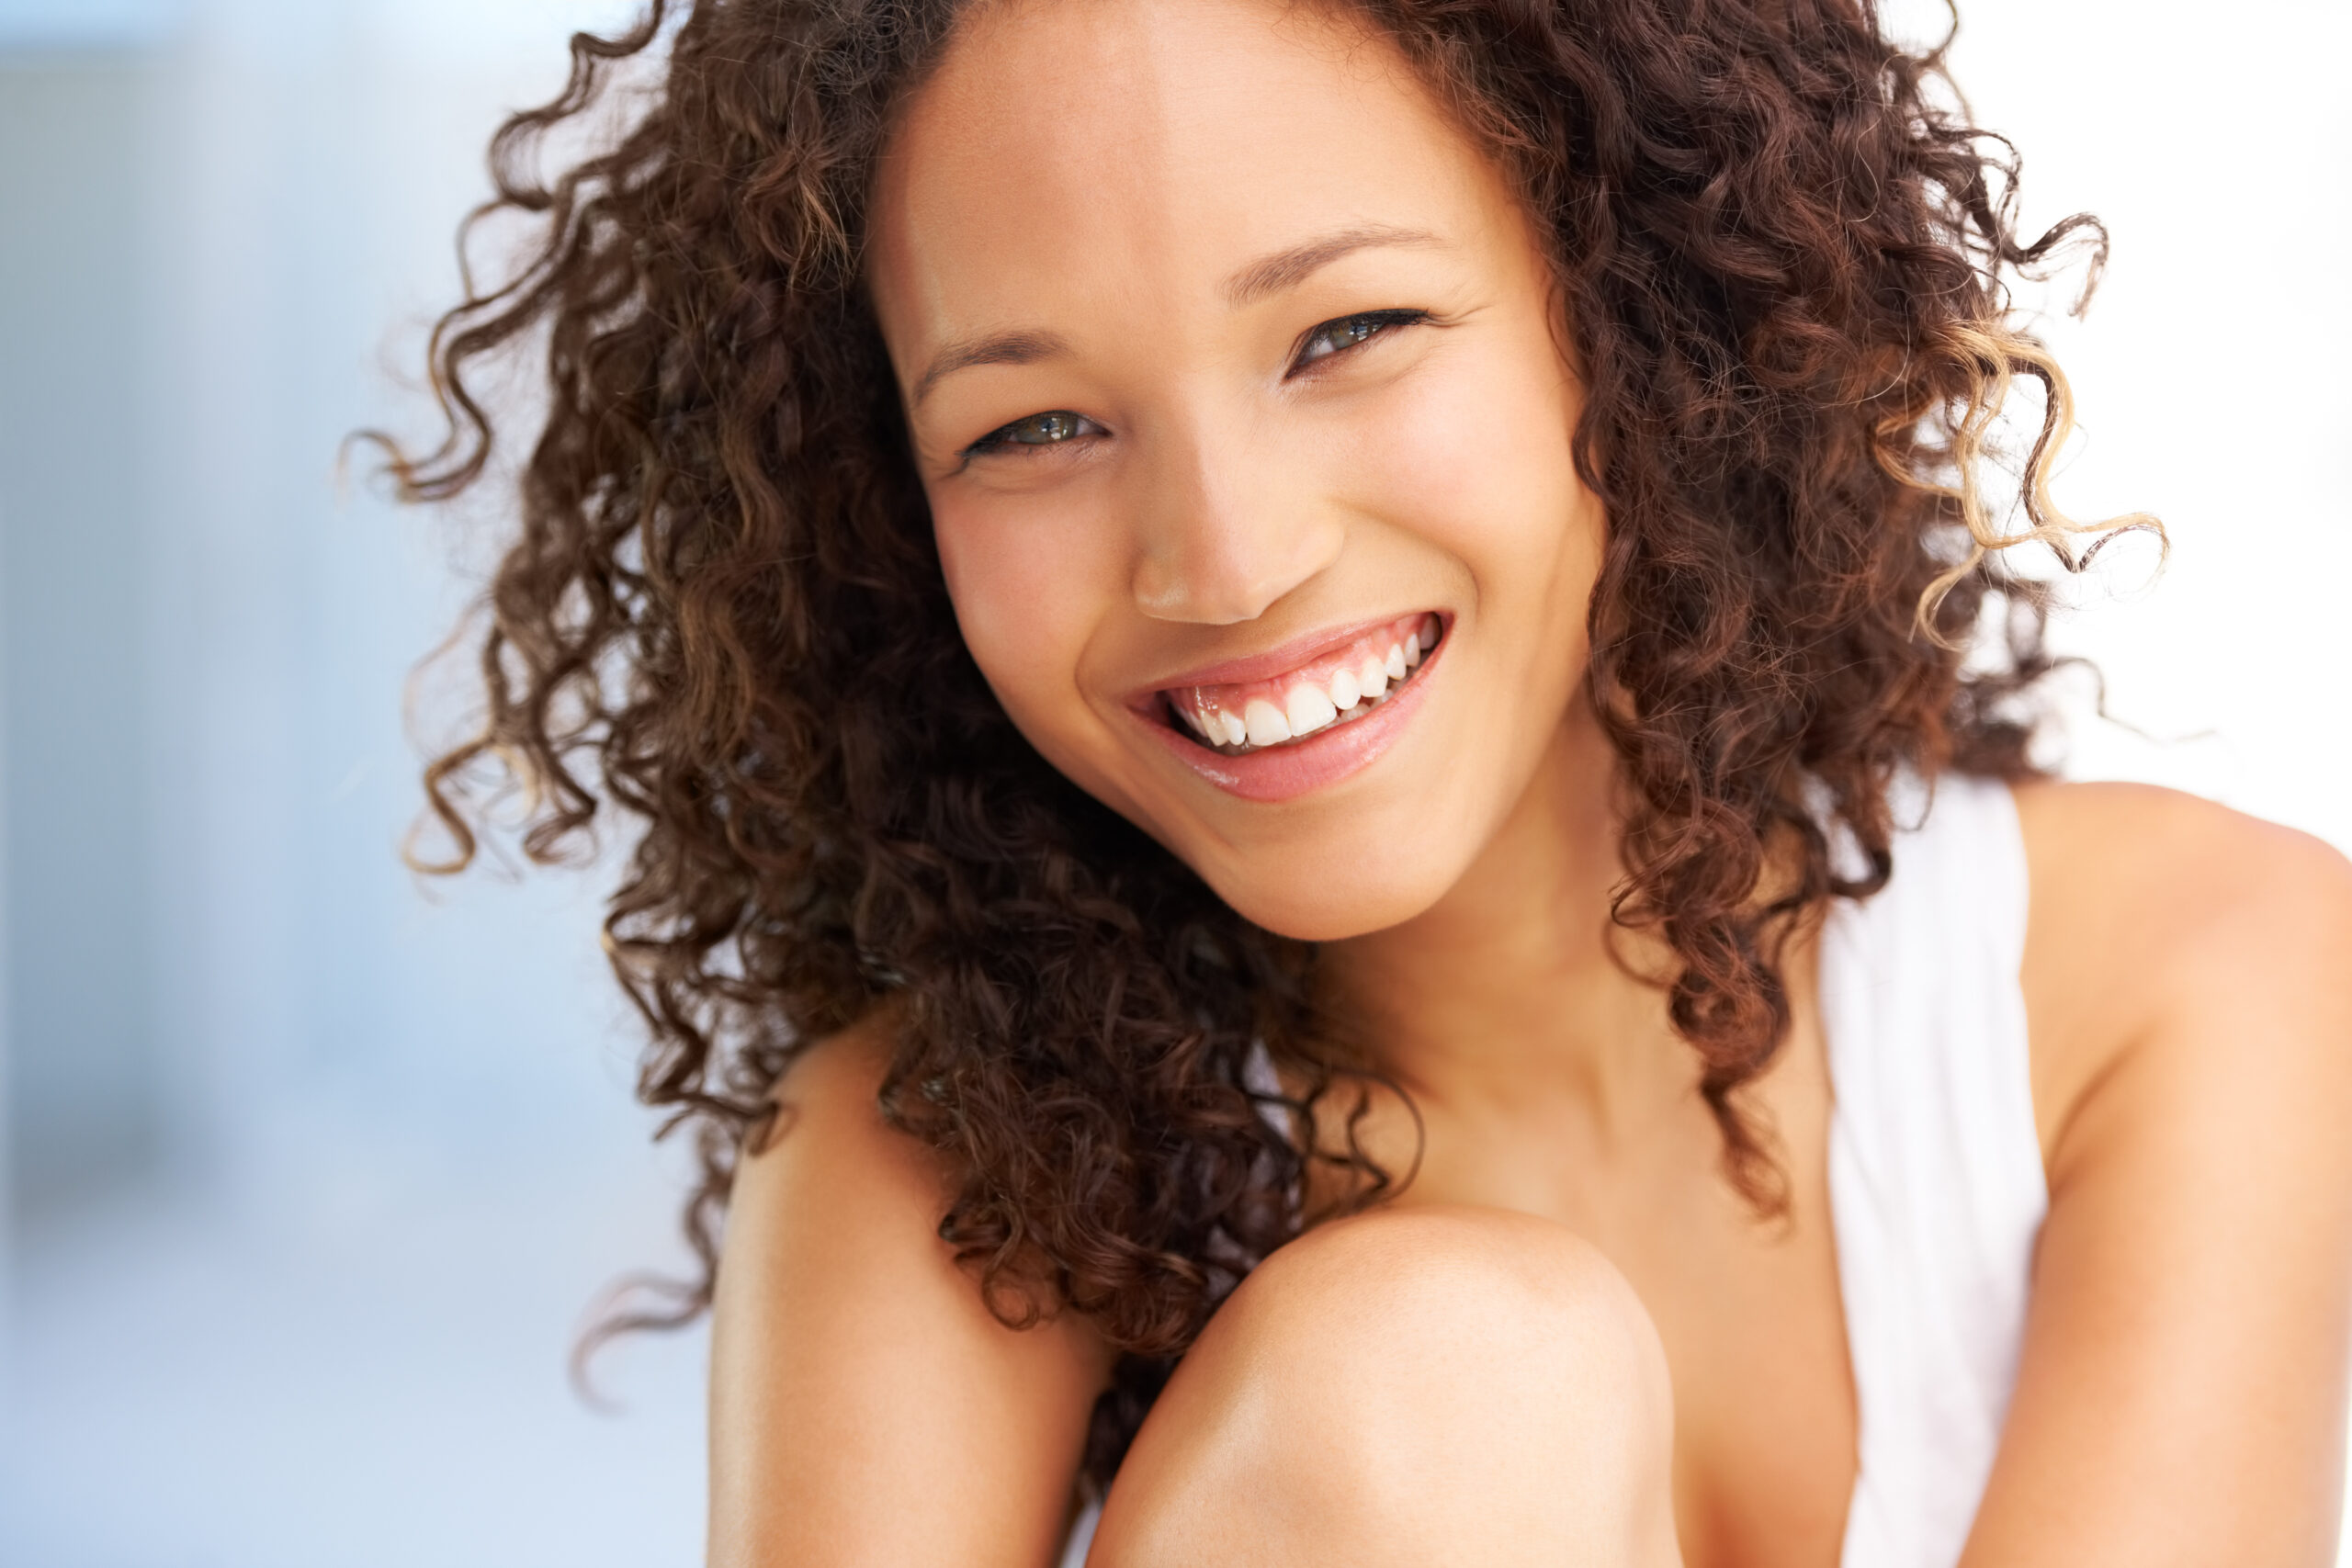 teetch whitining, smile makeover, teech whitening tracy ca